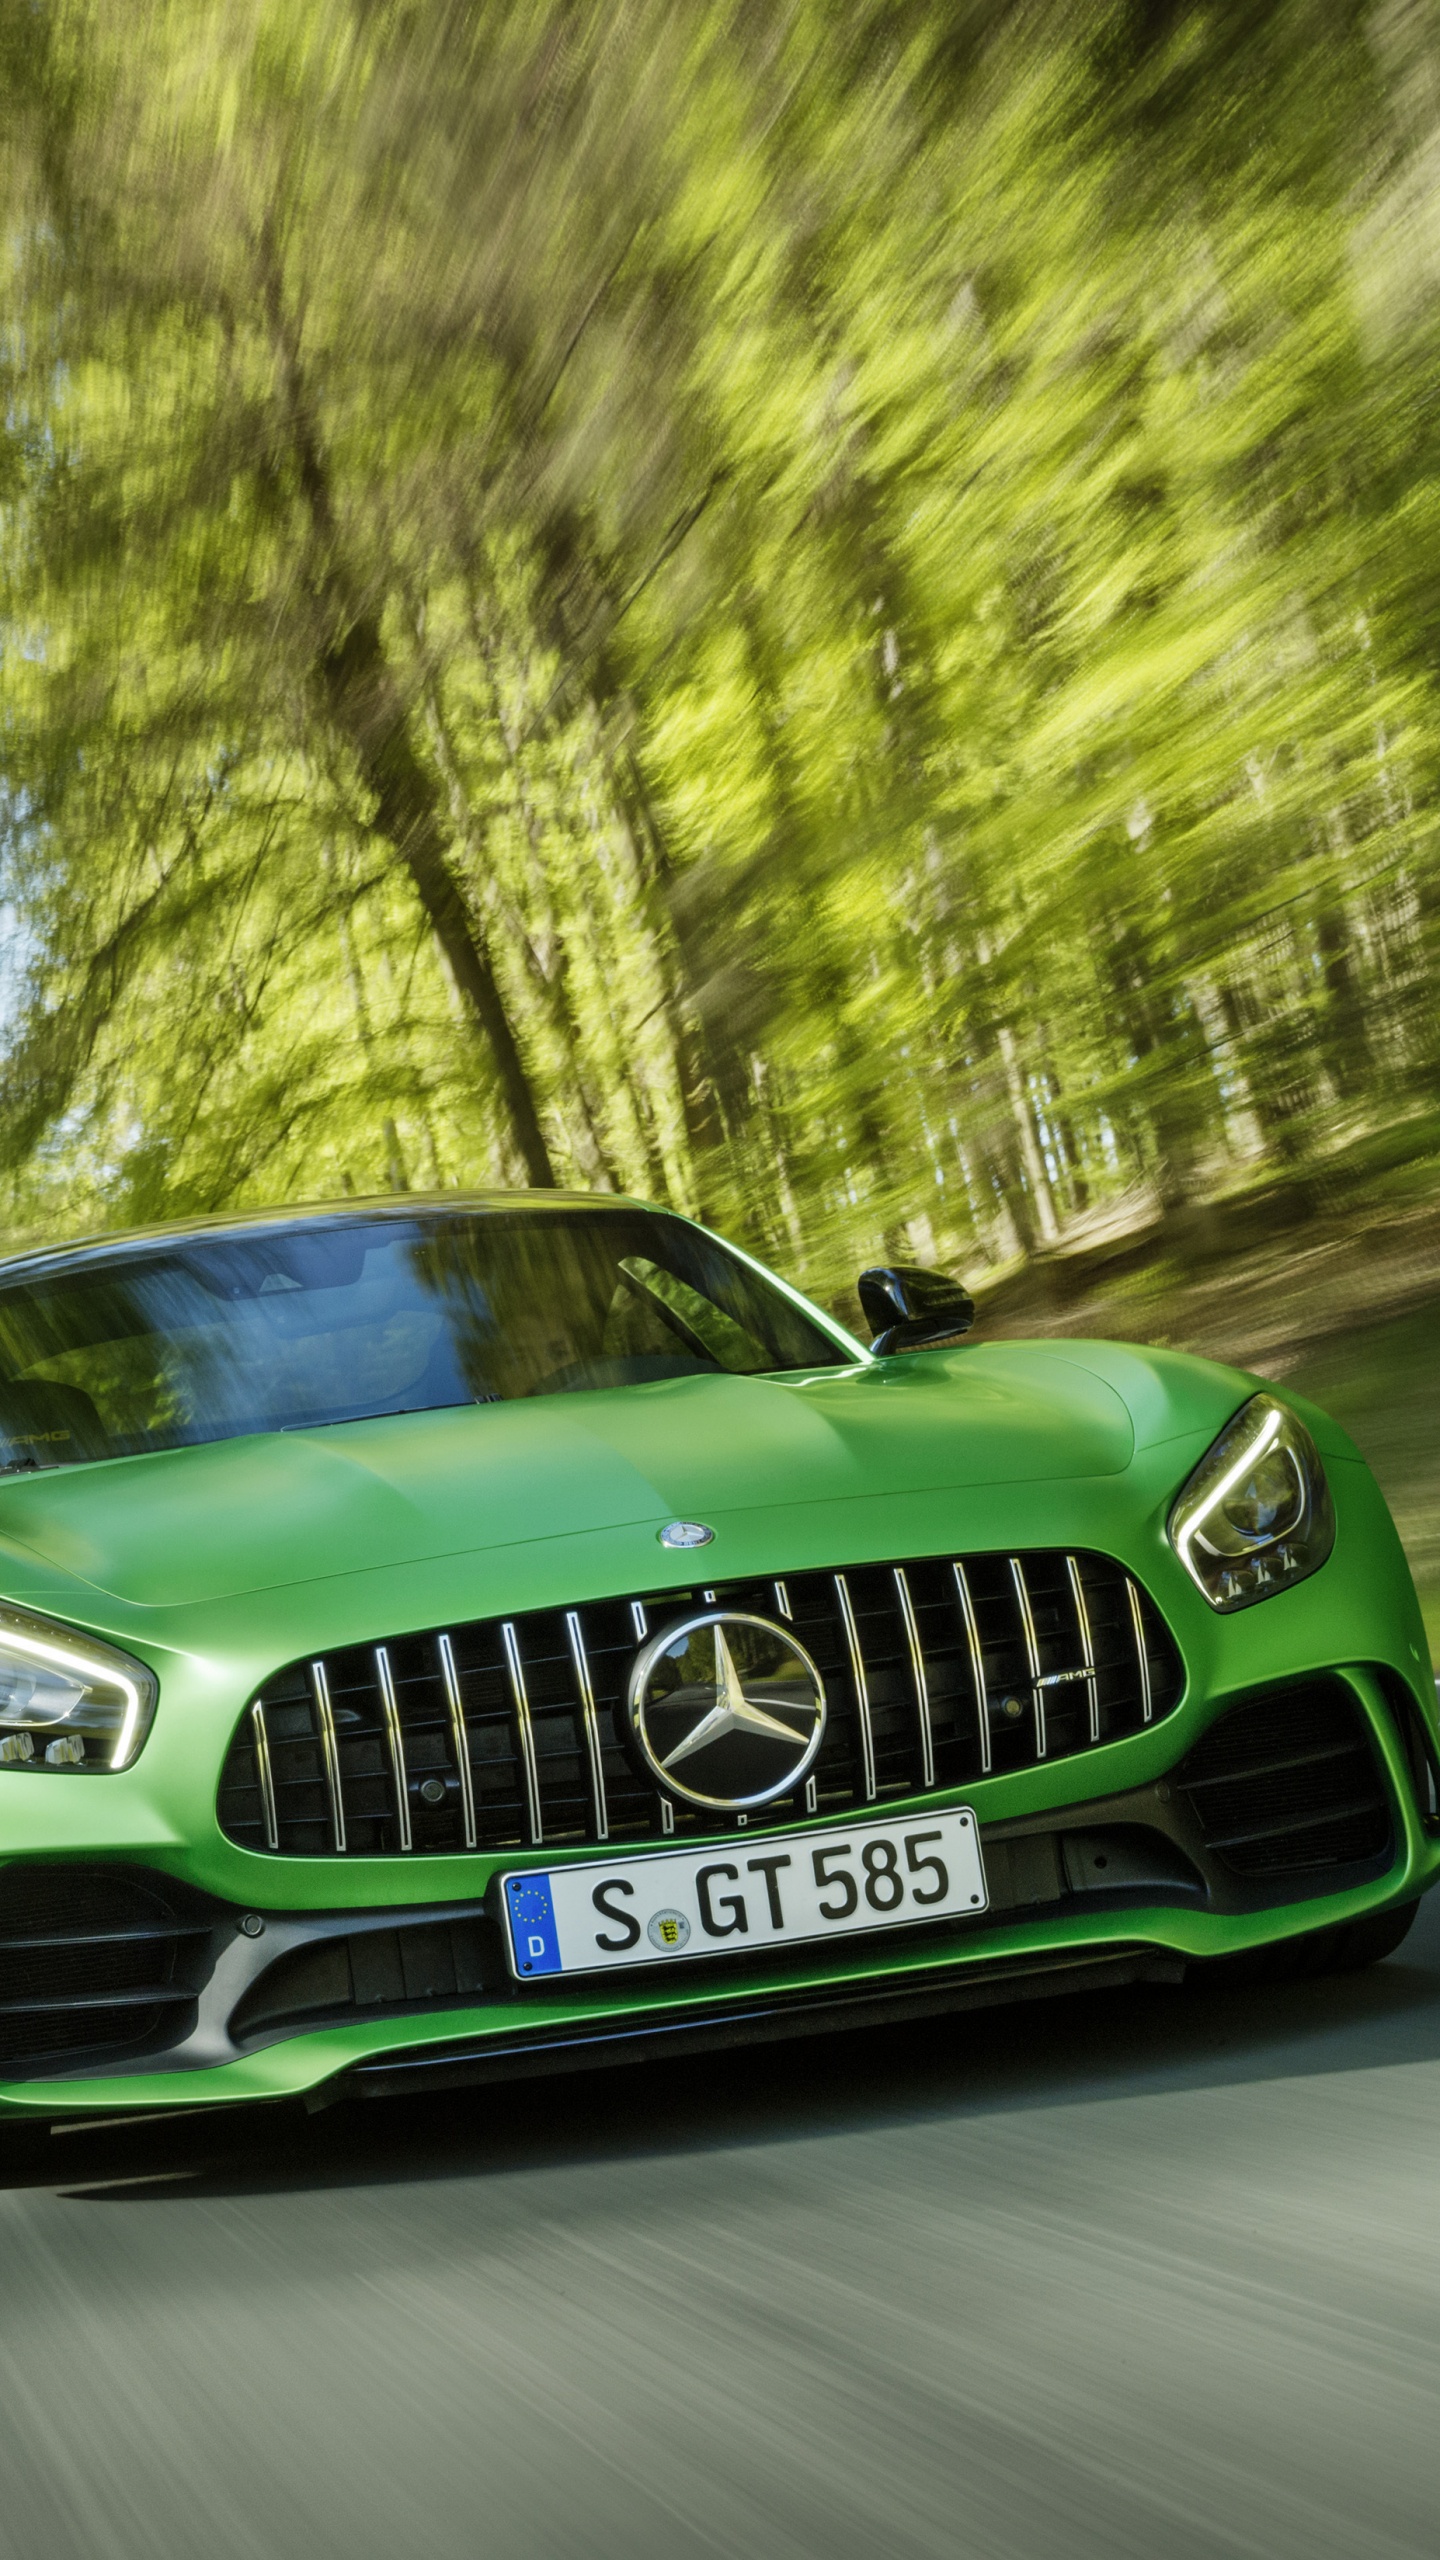 Green Mercedes Benz Car on Road During Daytime. Wallpaper in 1440x2560 Resolution